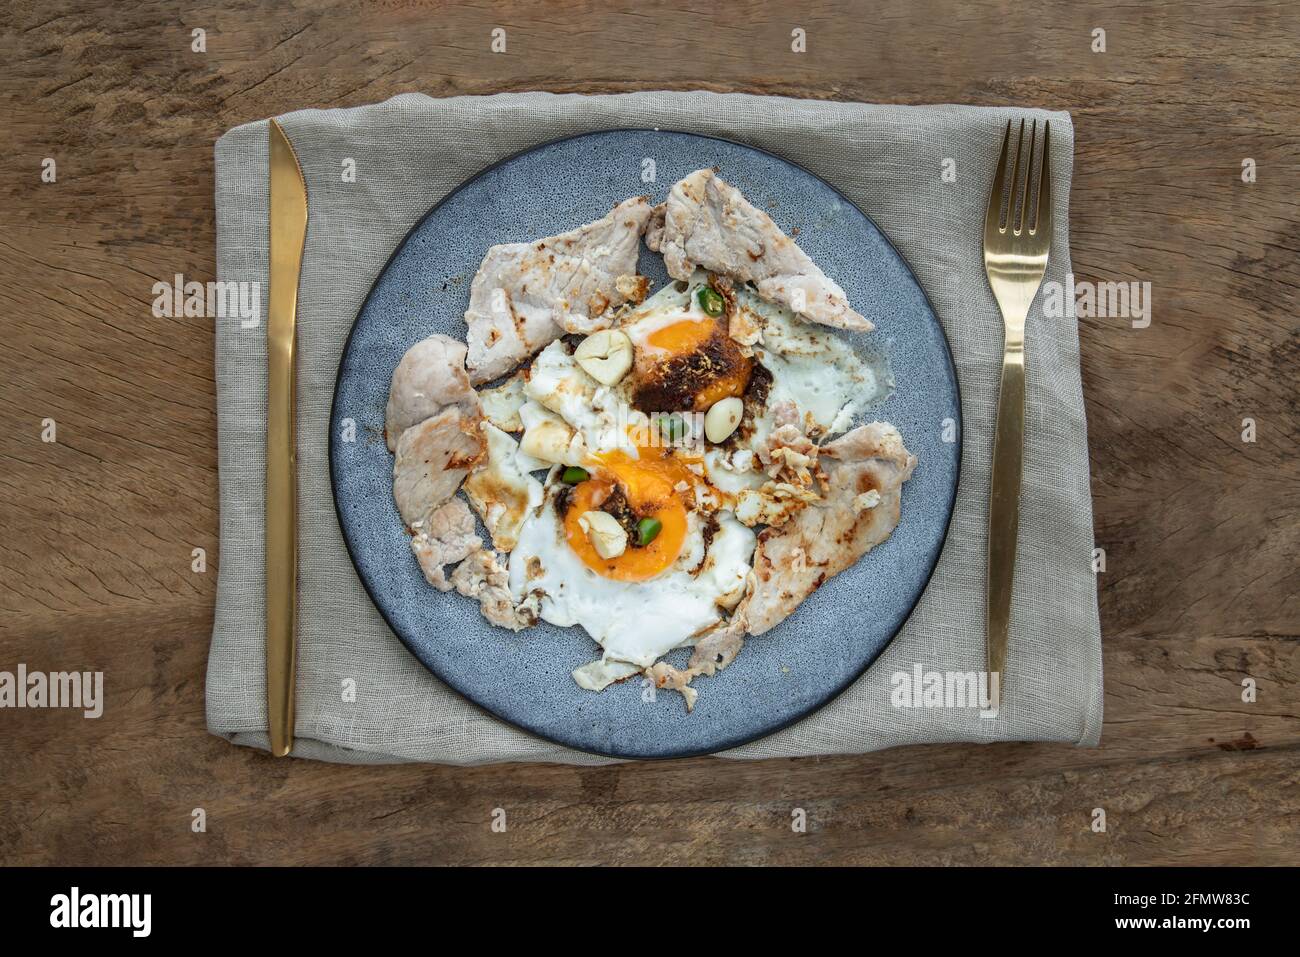 Breakfast with Fried egg, Roasted pork sprinkle garlic, chili in plate with Knife and fork on old wooden table. Selective focuse. Stock Photo